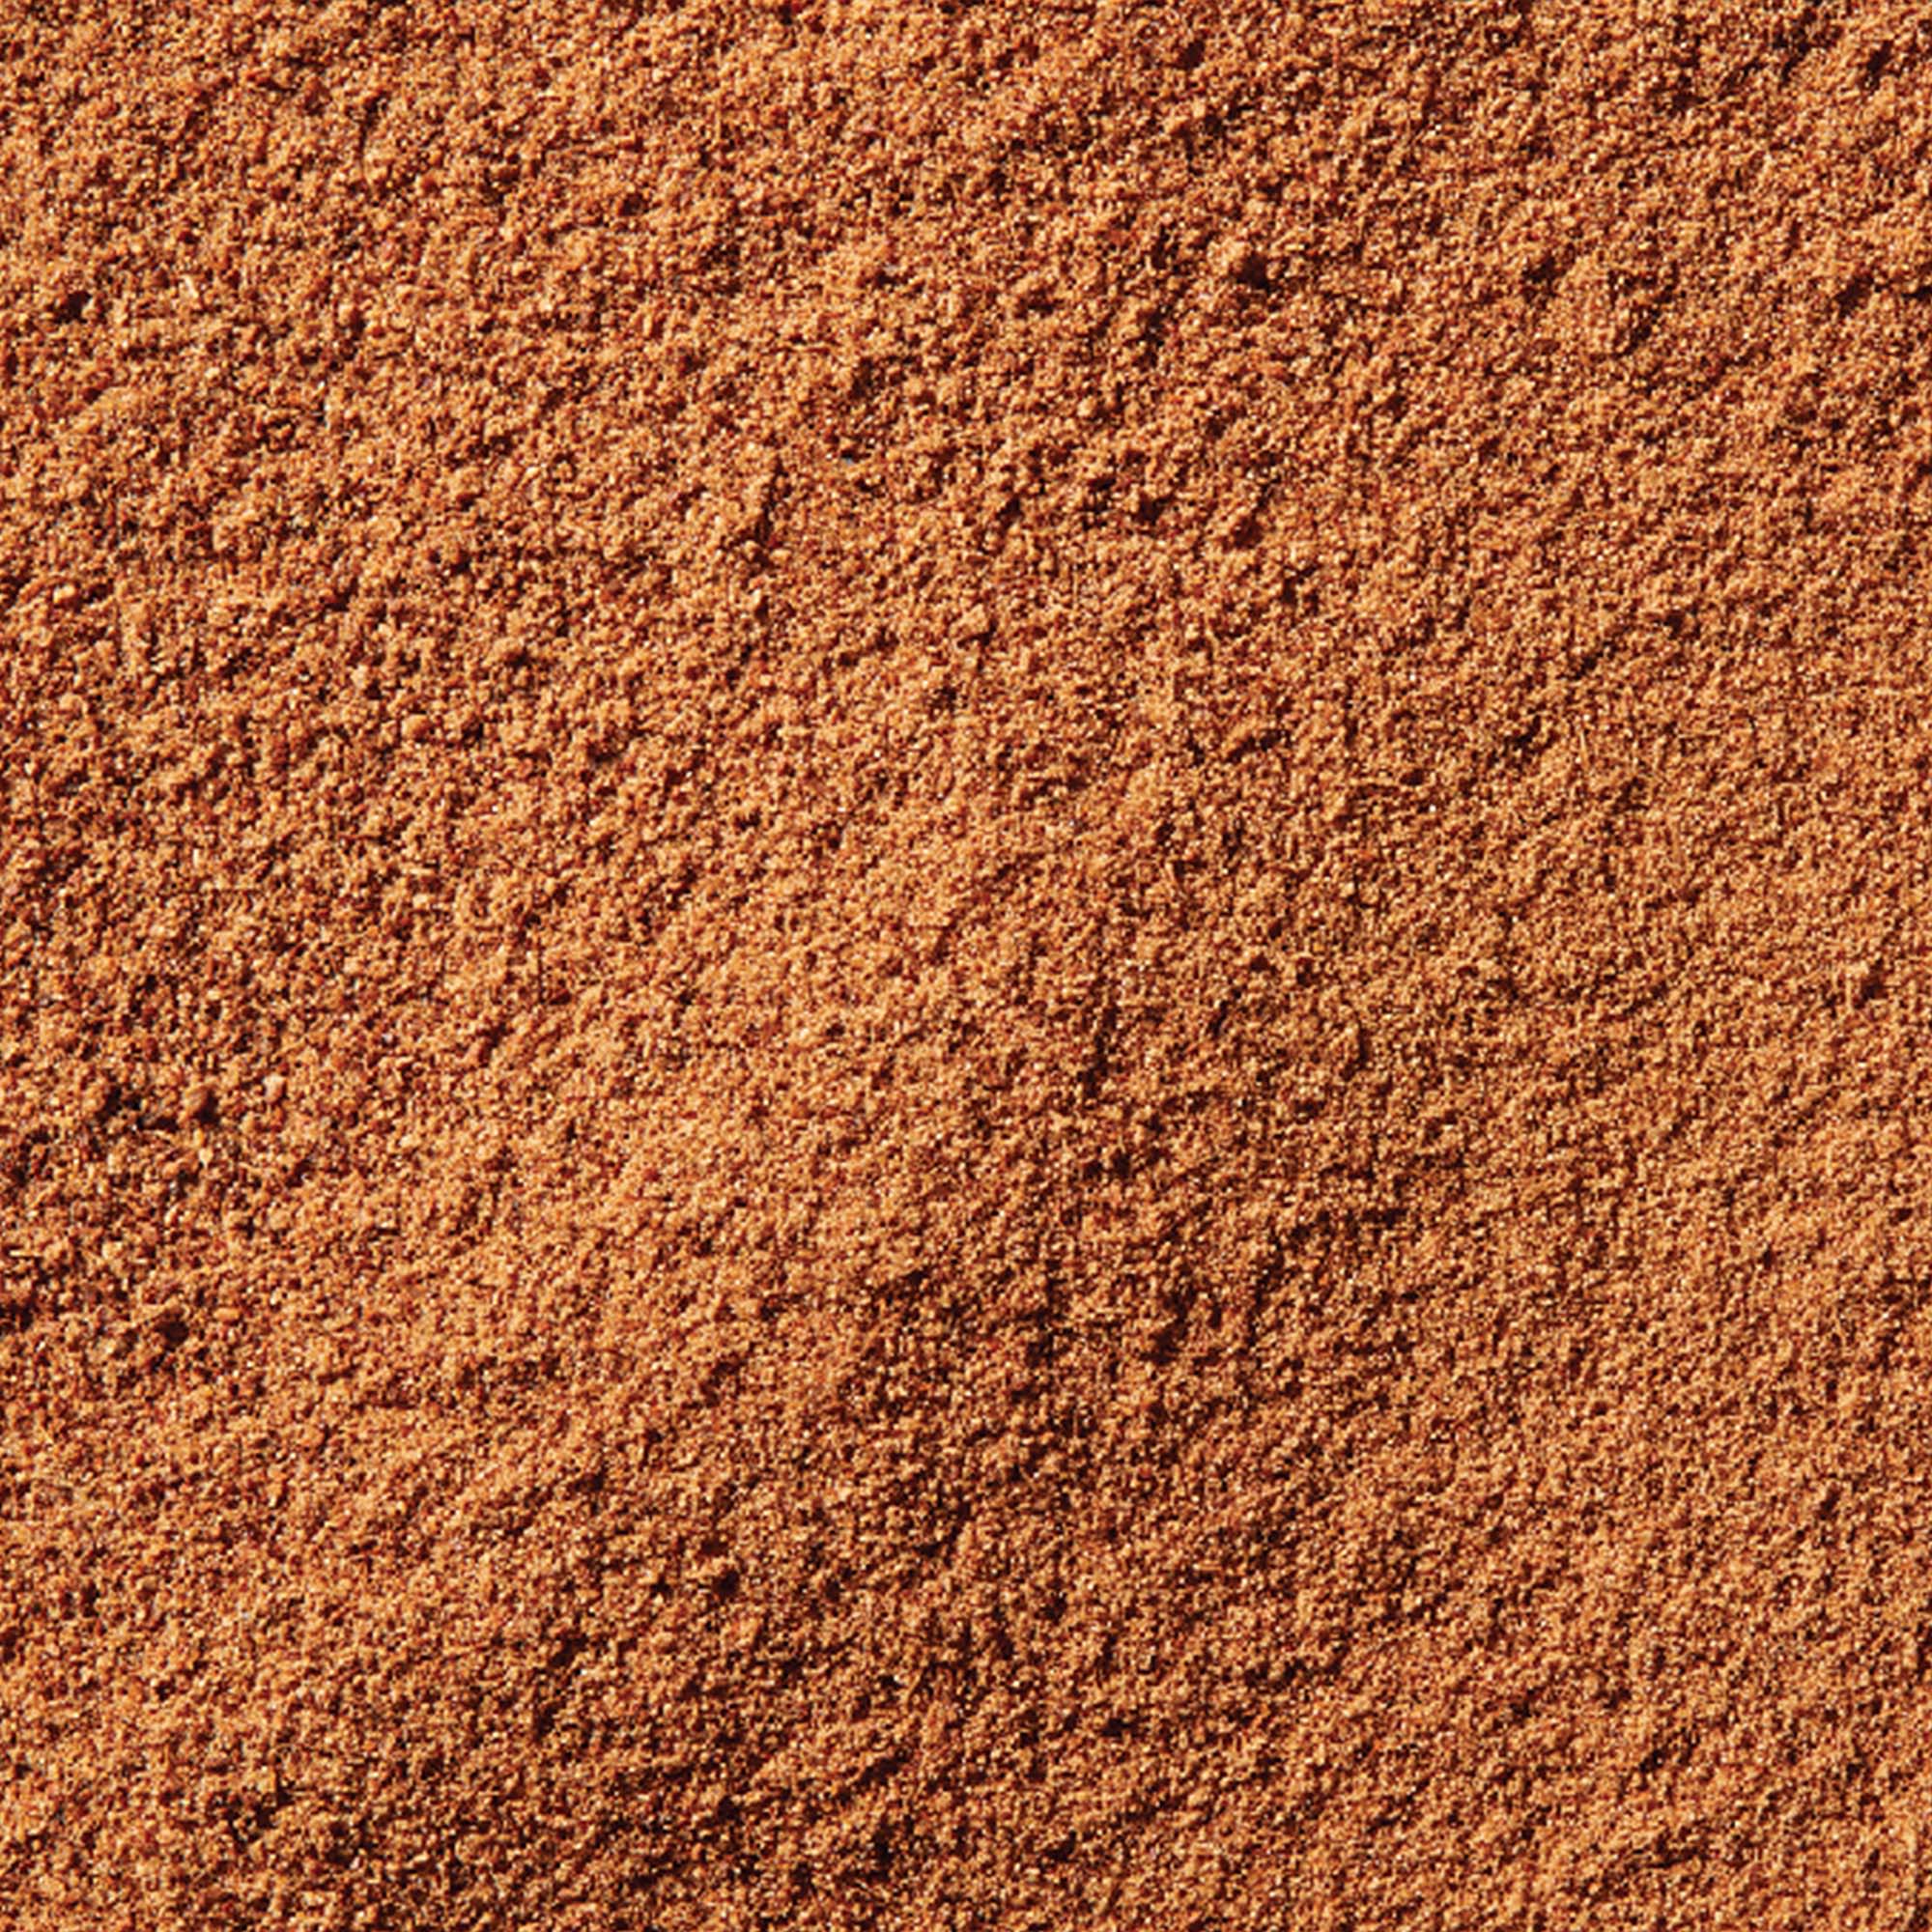 McCormick Gingerbread Spice, 0.8 oz - image 3 of 10